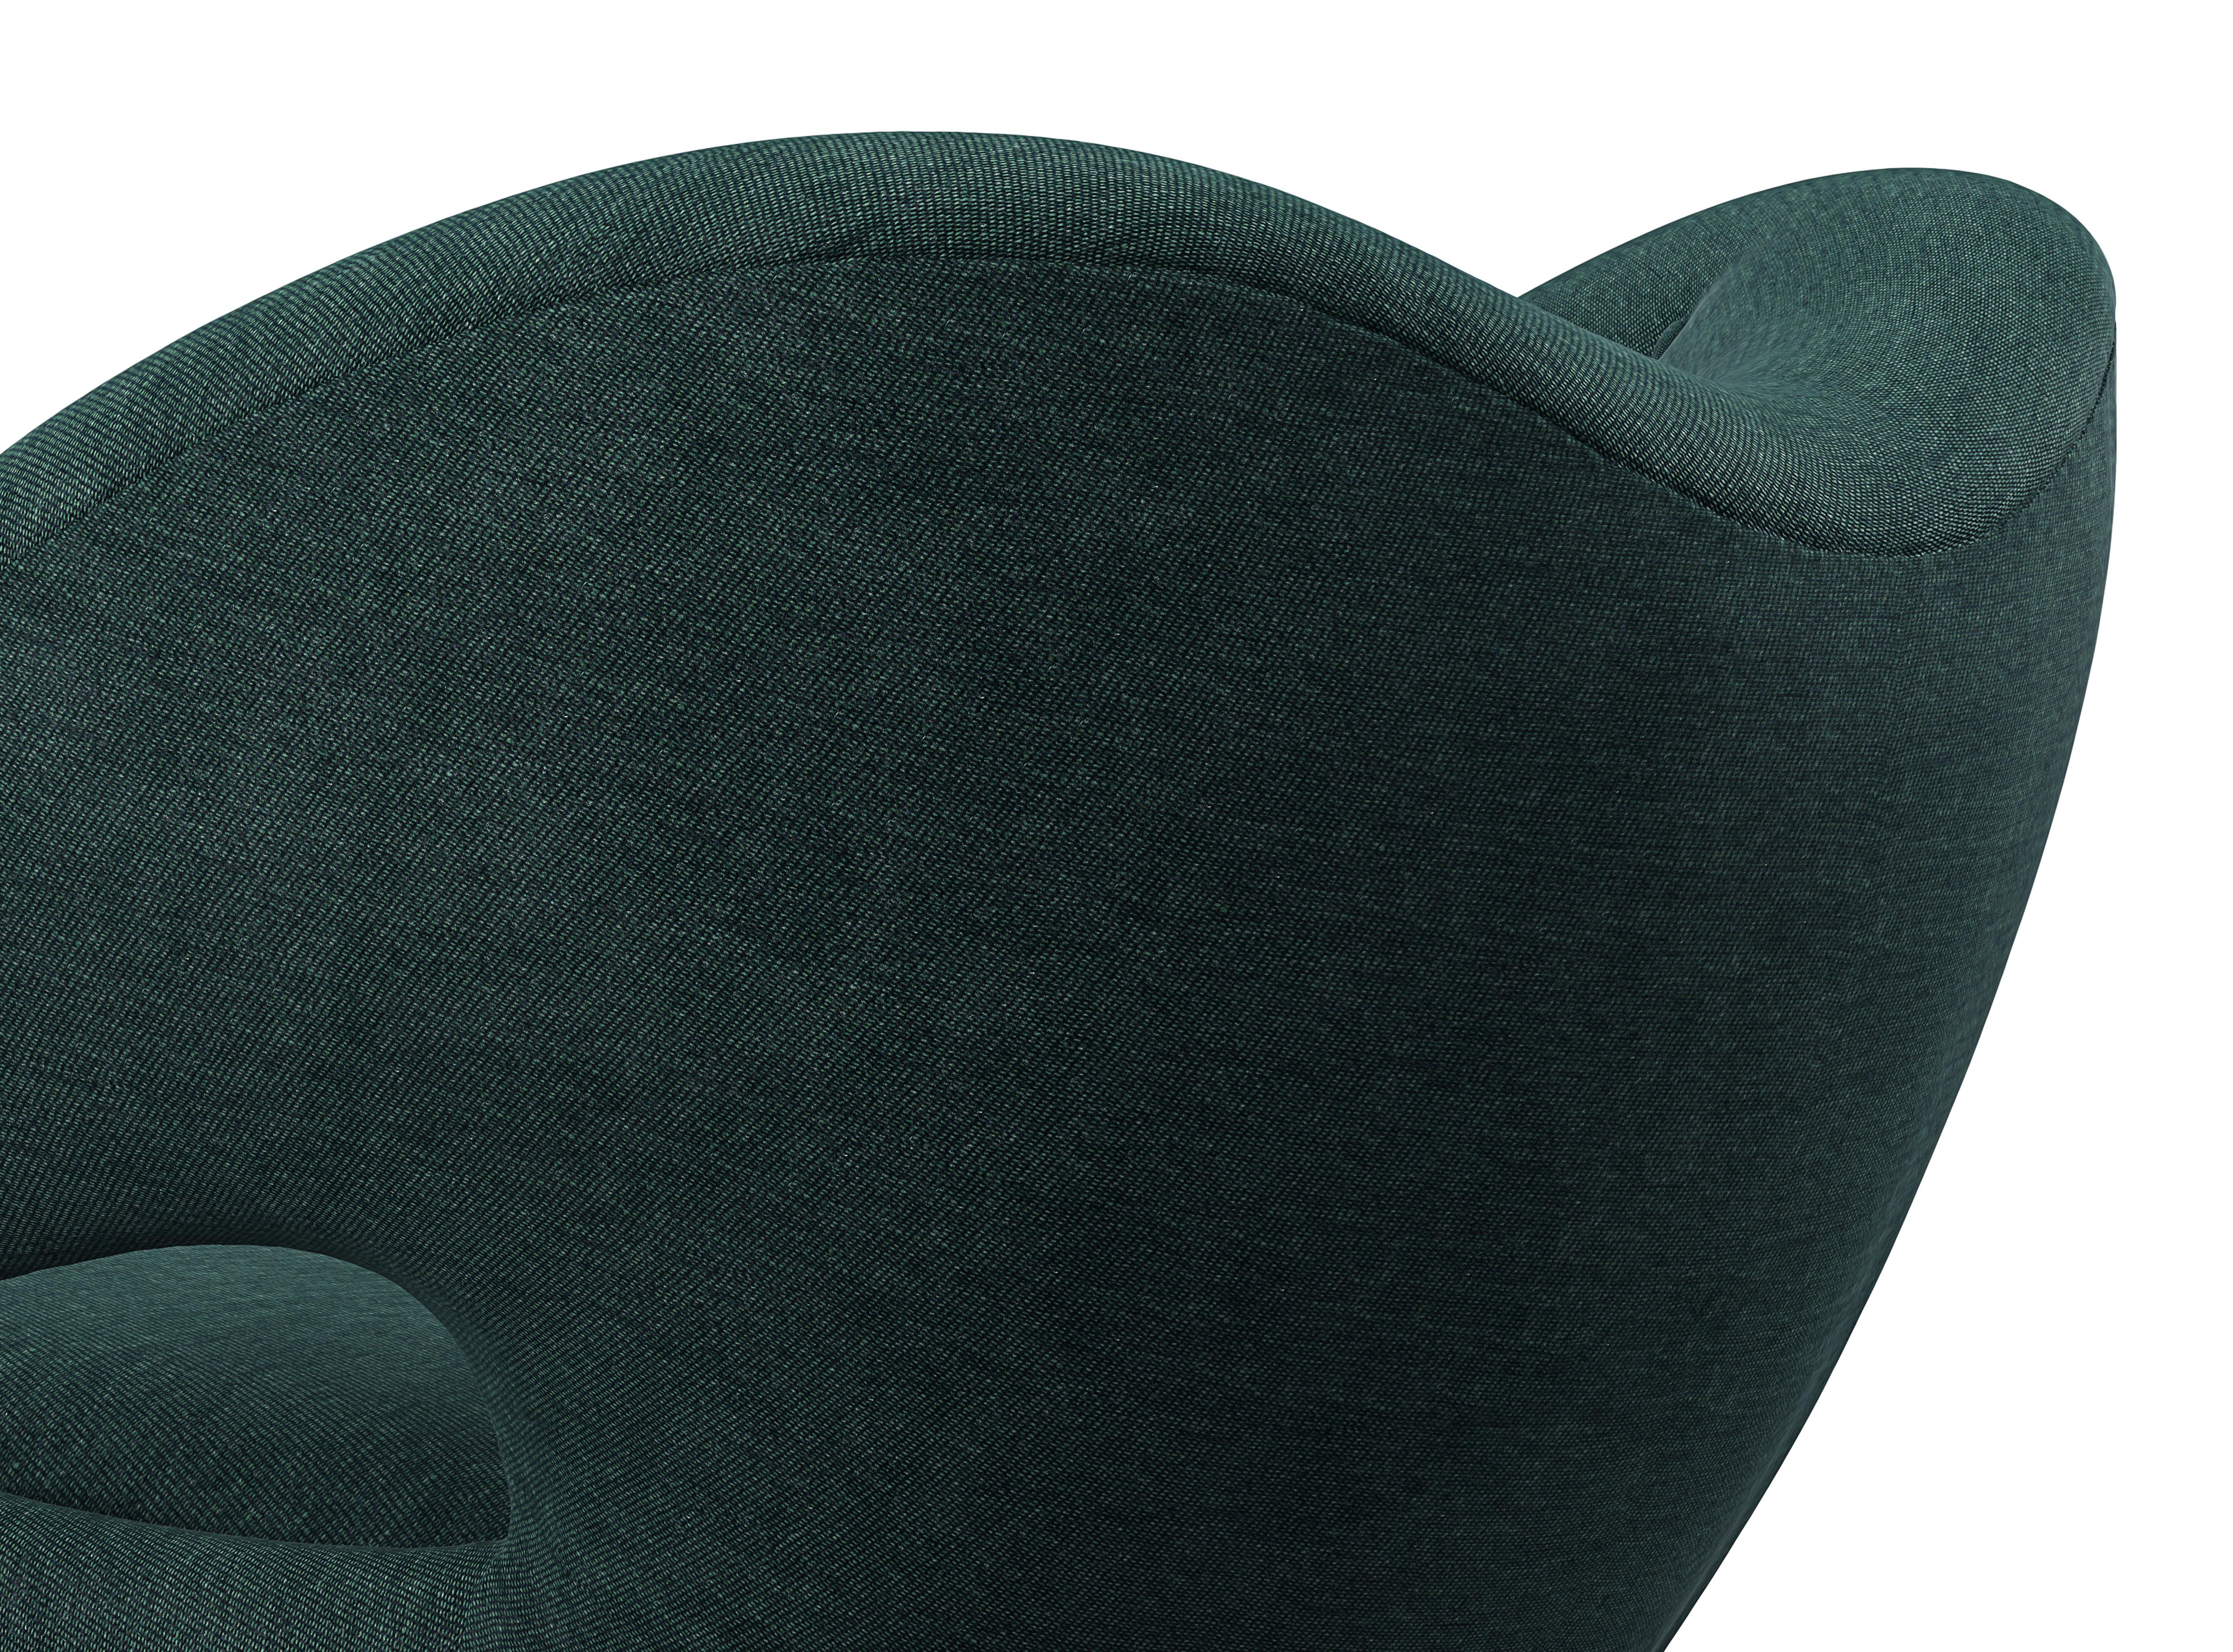 Finn Juhl Pelican Chair Upholstered in Wood and Fabric 1